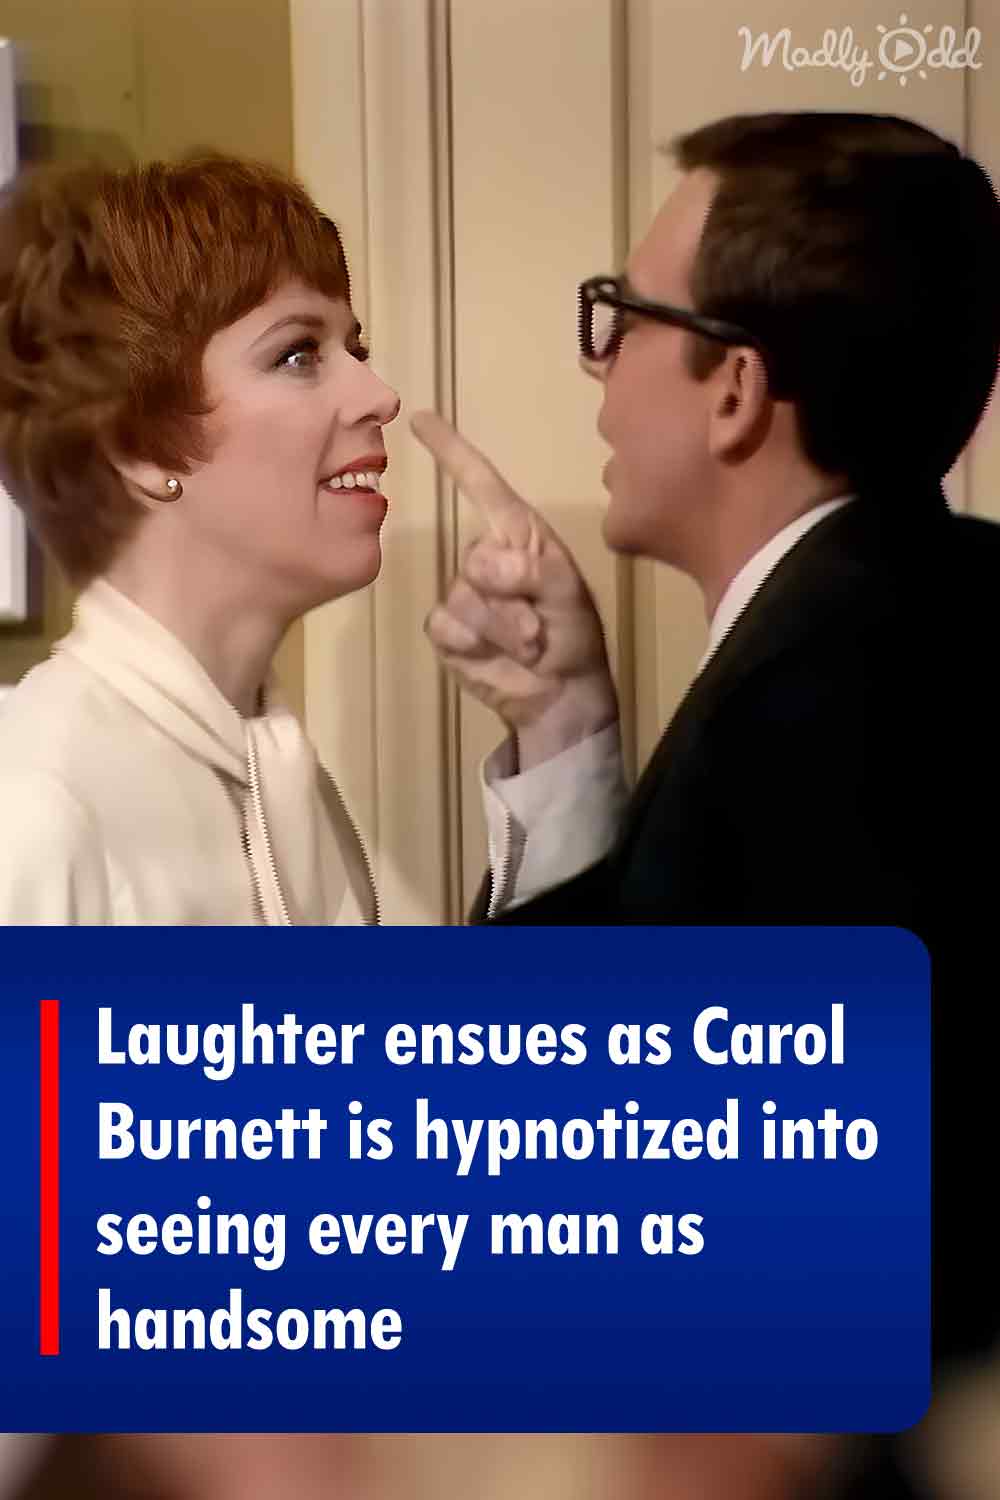 Laughter ensues as Carol Burnett is hypnotized into seeing every man as handsome